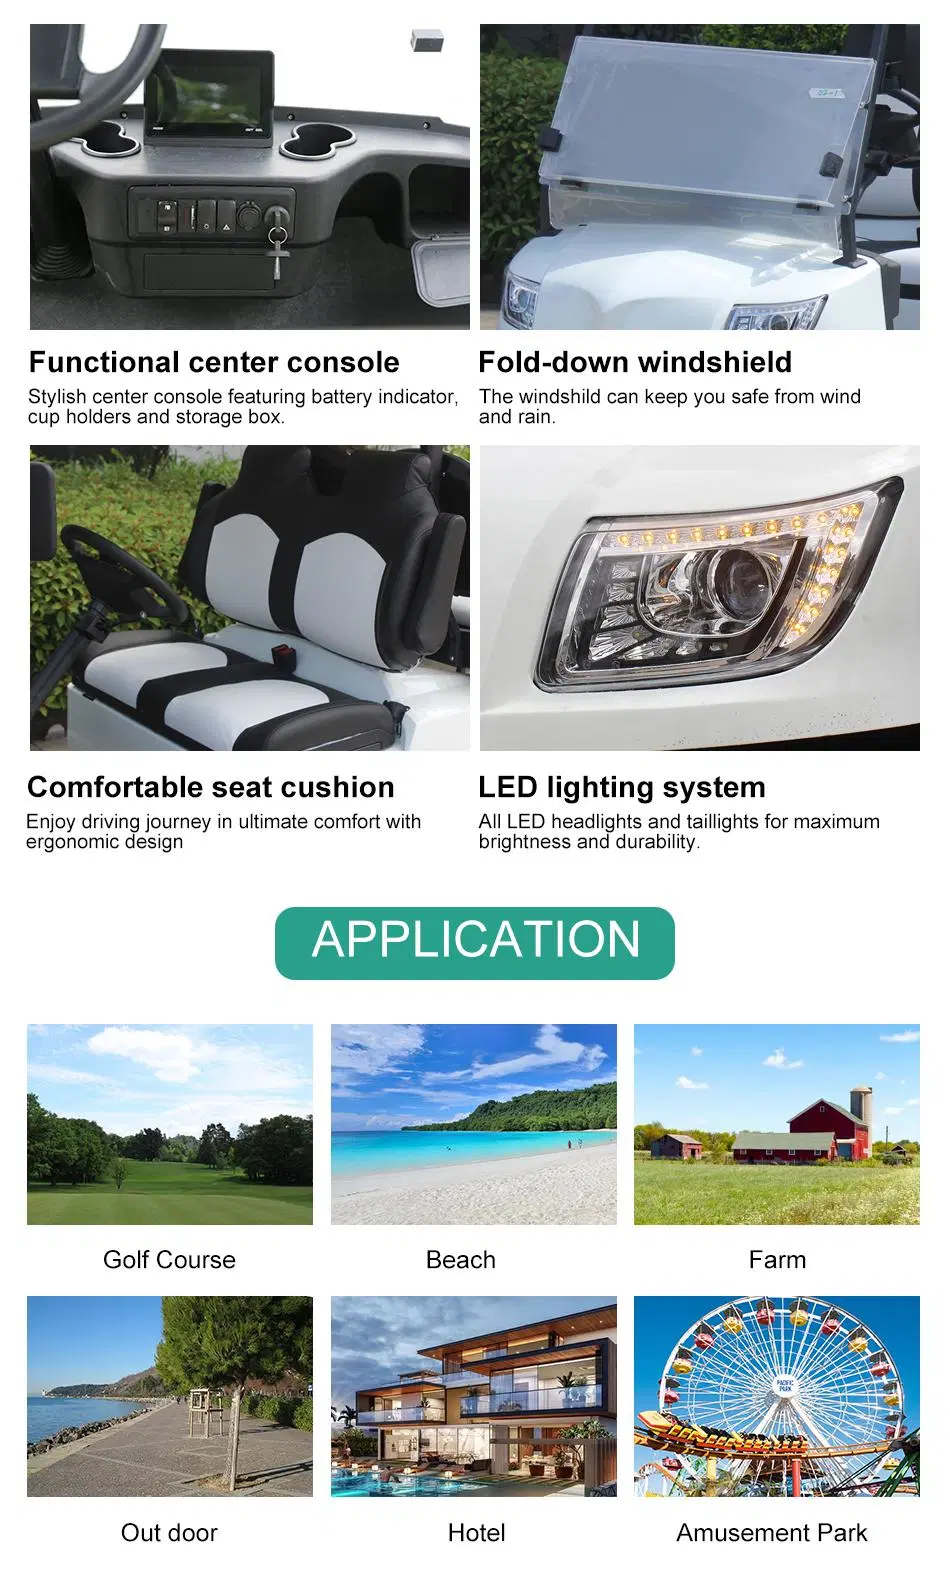 Farm for Sale Custom Golf Cart with All Accessories Antique Electric Cars